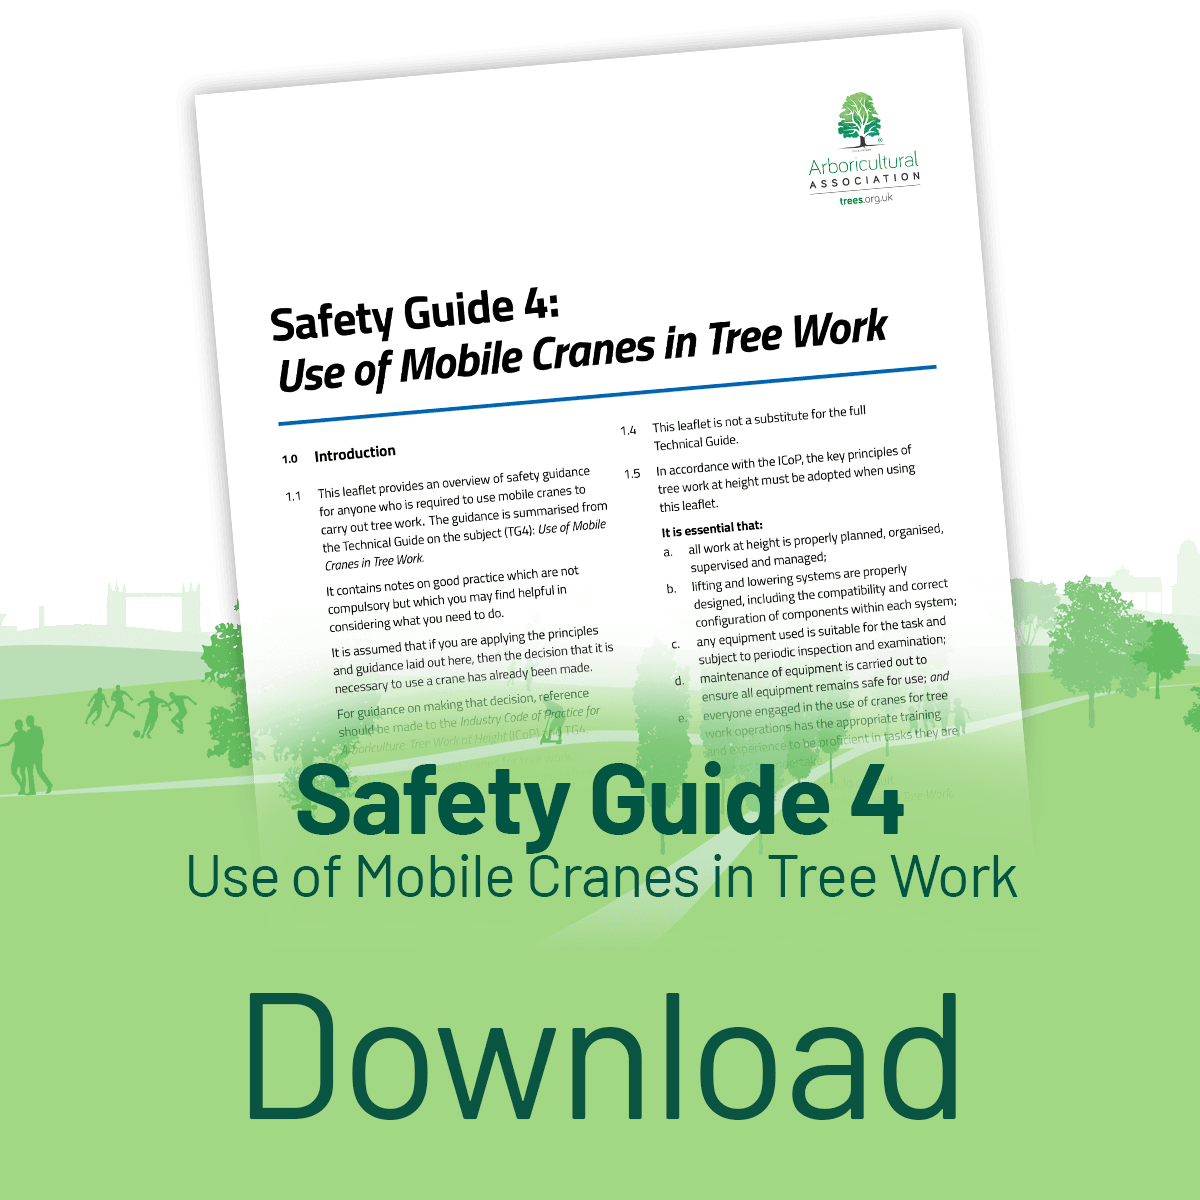 Download the Safety Guide 4